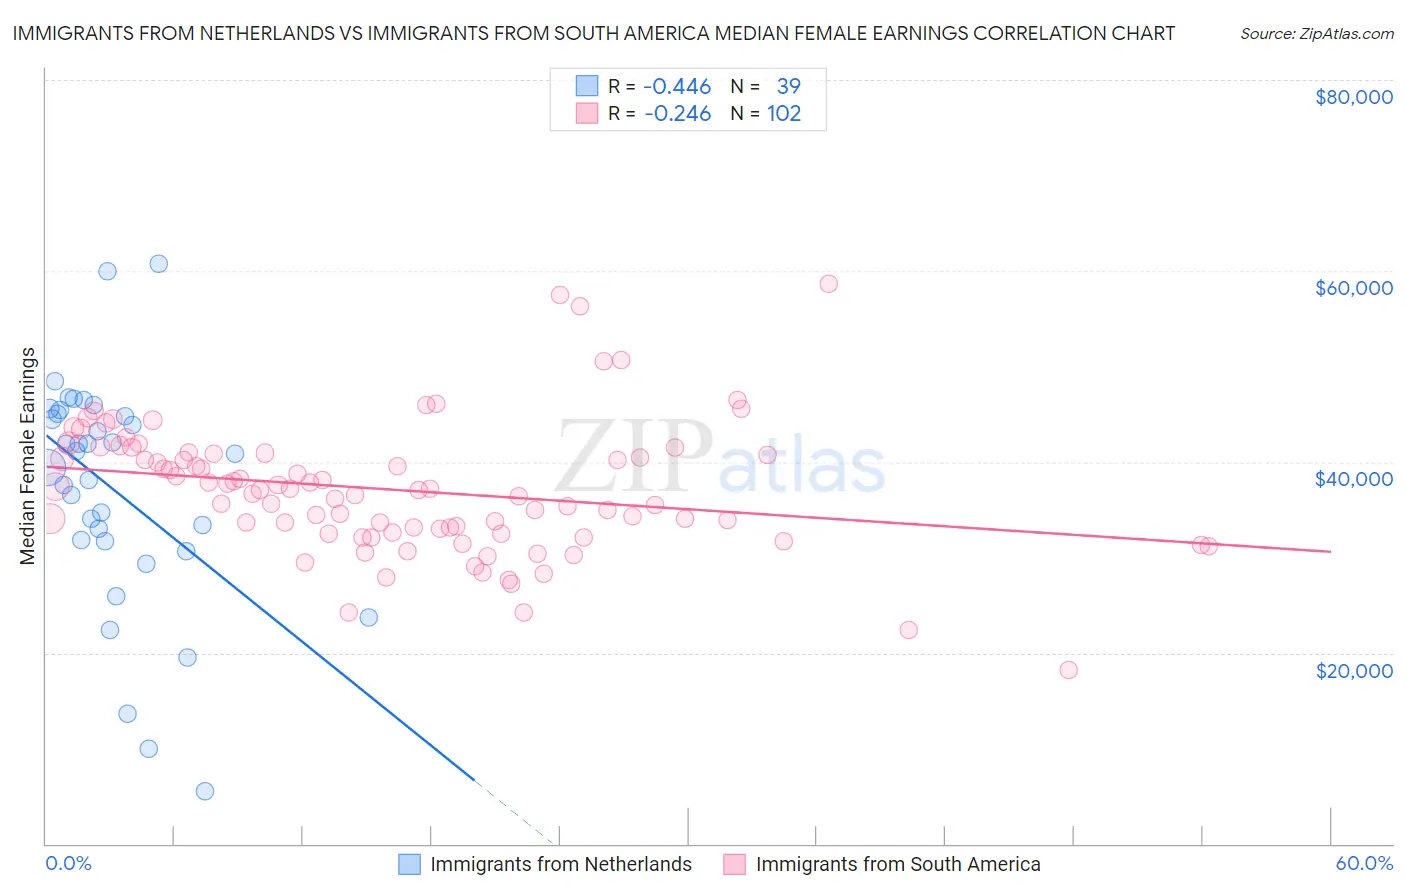 Immigrants from Netherlands vs Immigrants from South America Median Female Earnings